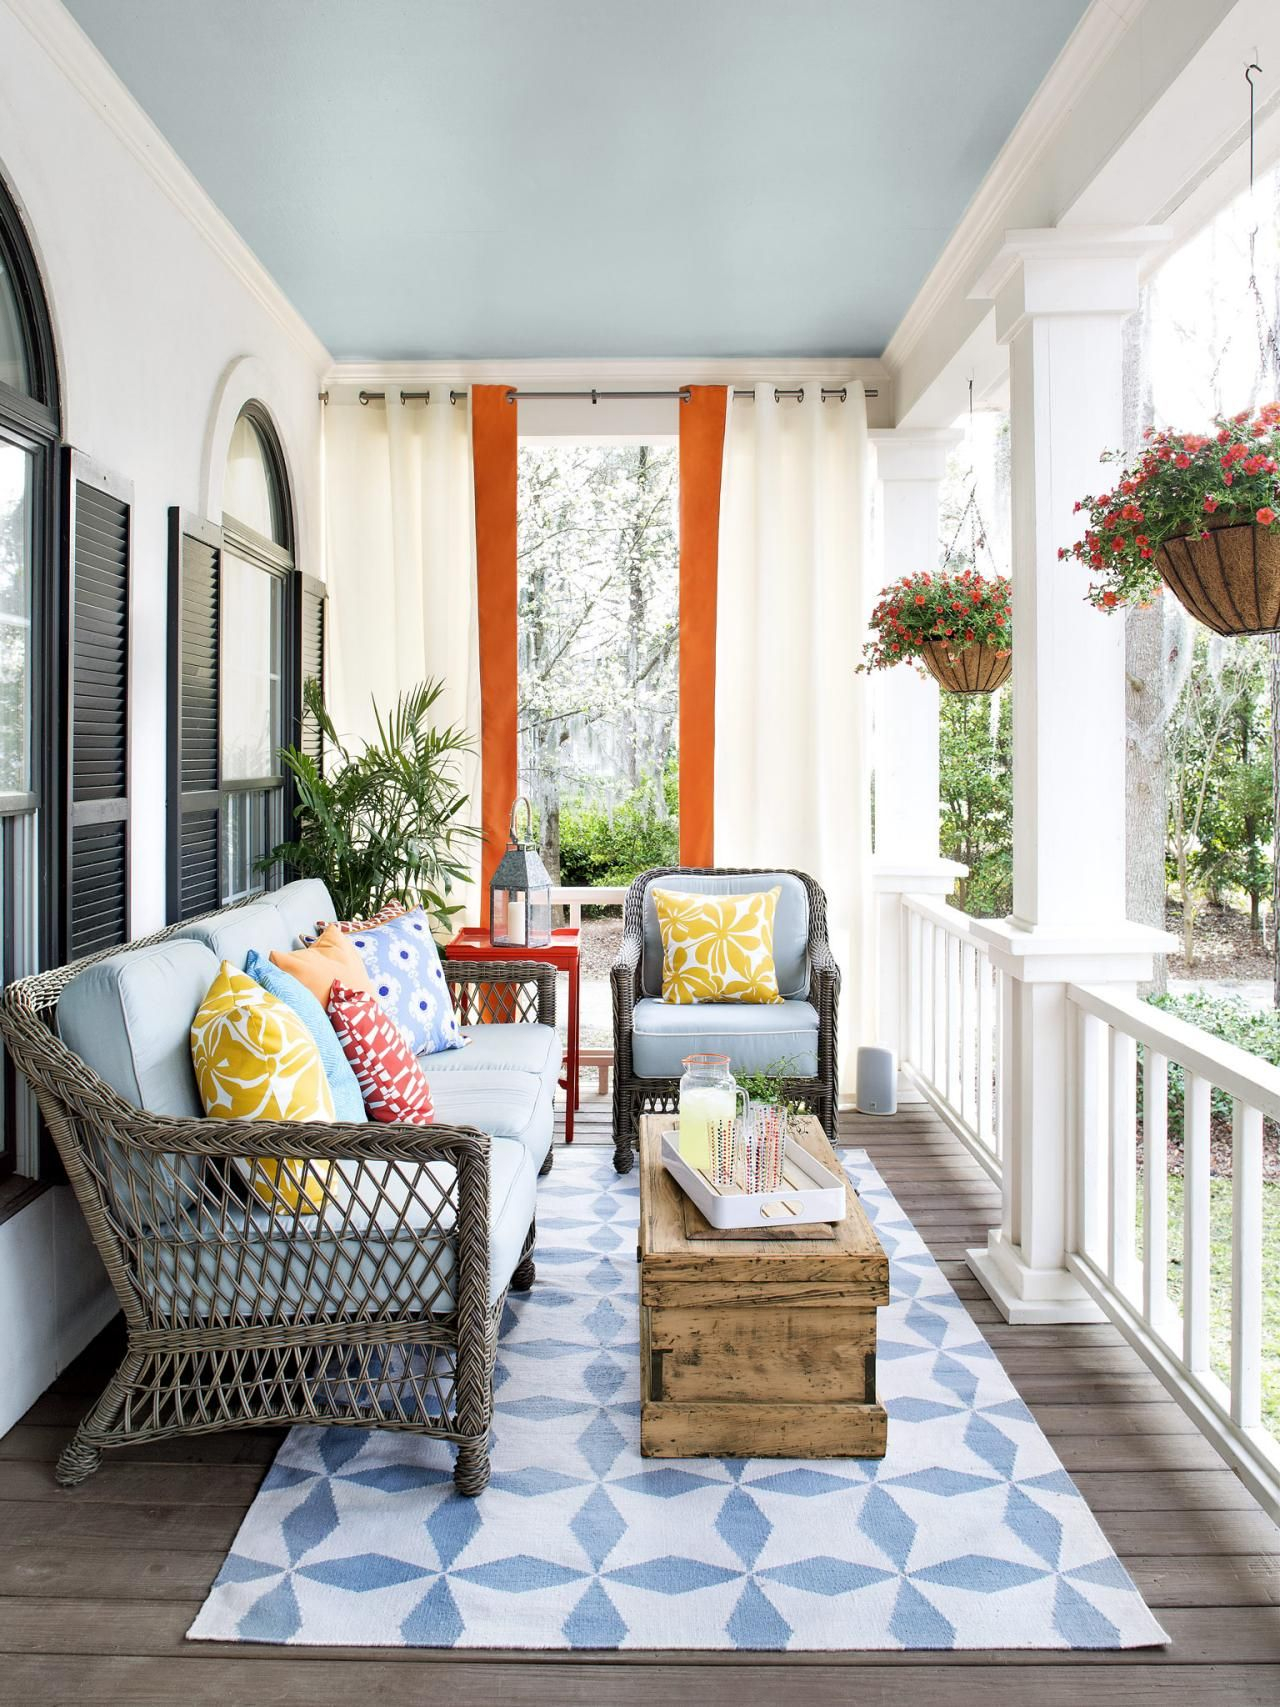 Porch Design And Decorating Ideas (With Images) | Porch regarding Outdoor Front Porch Furniture